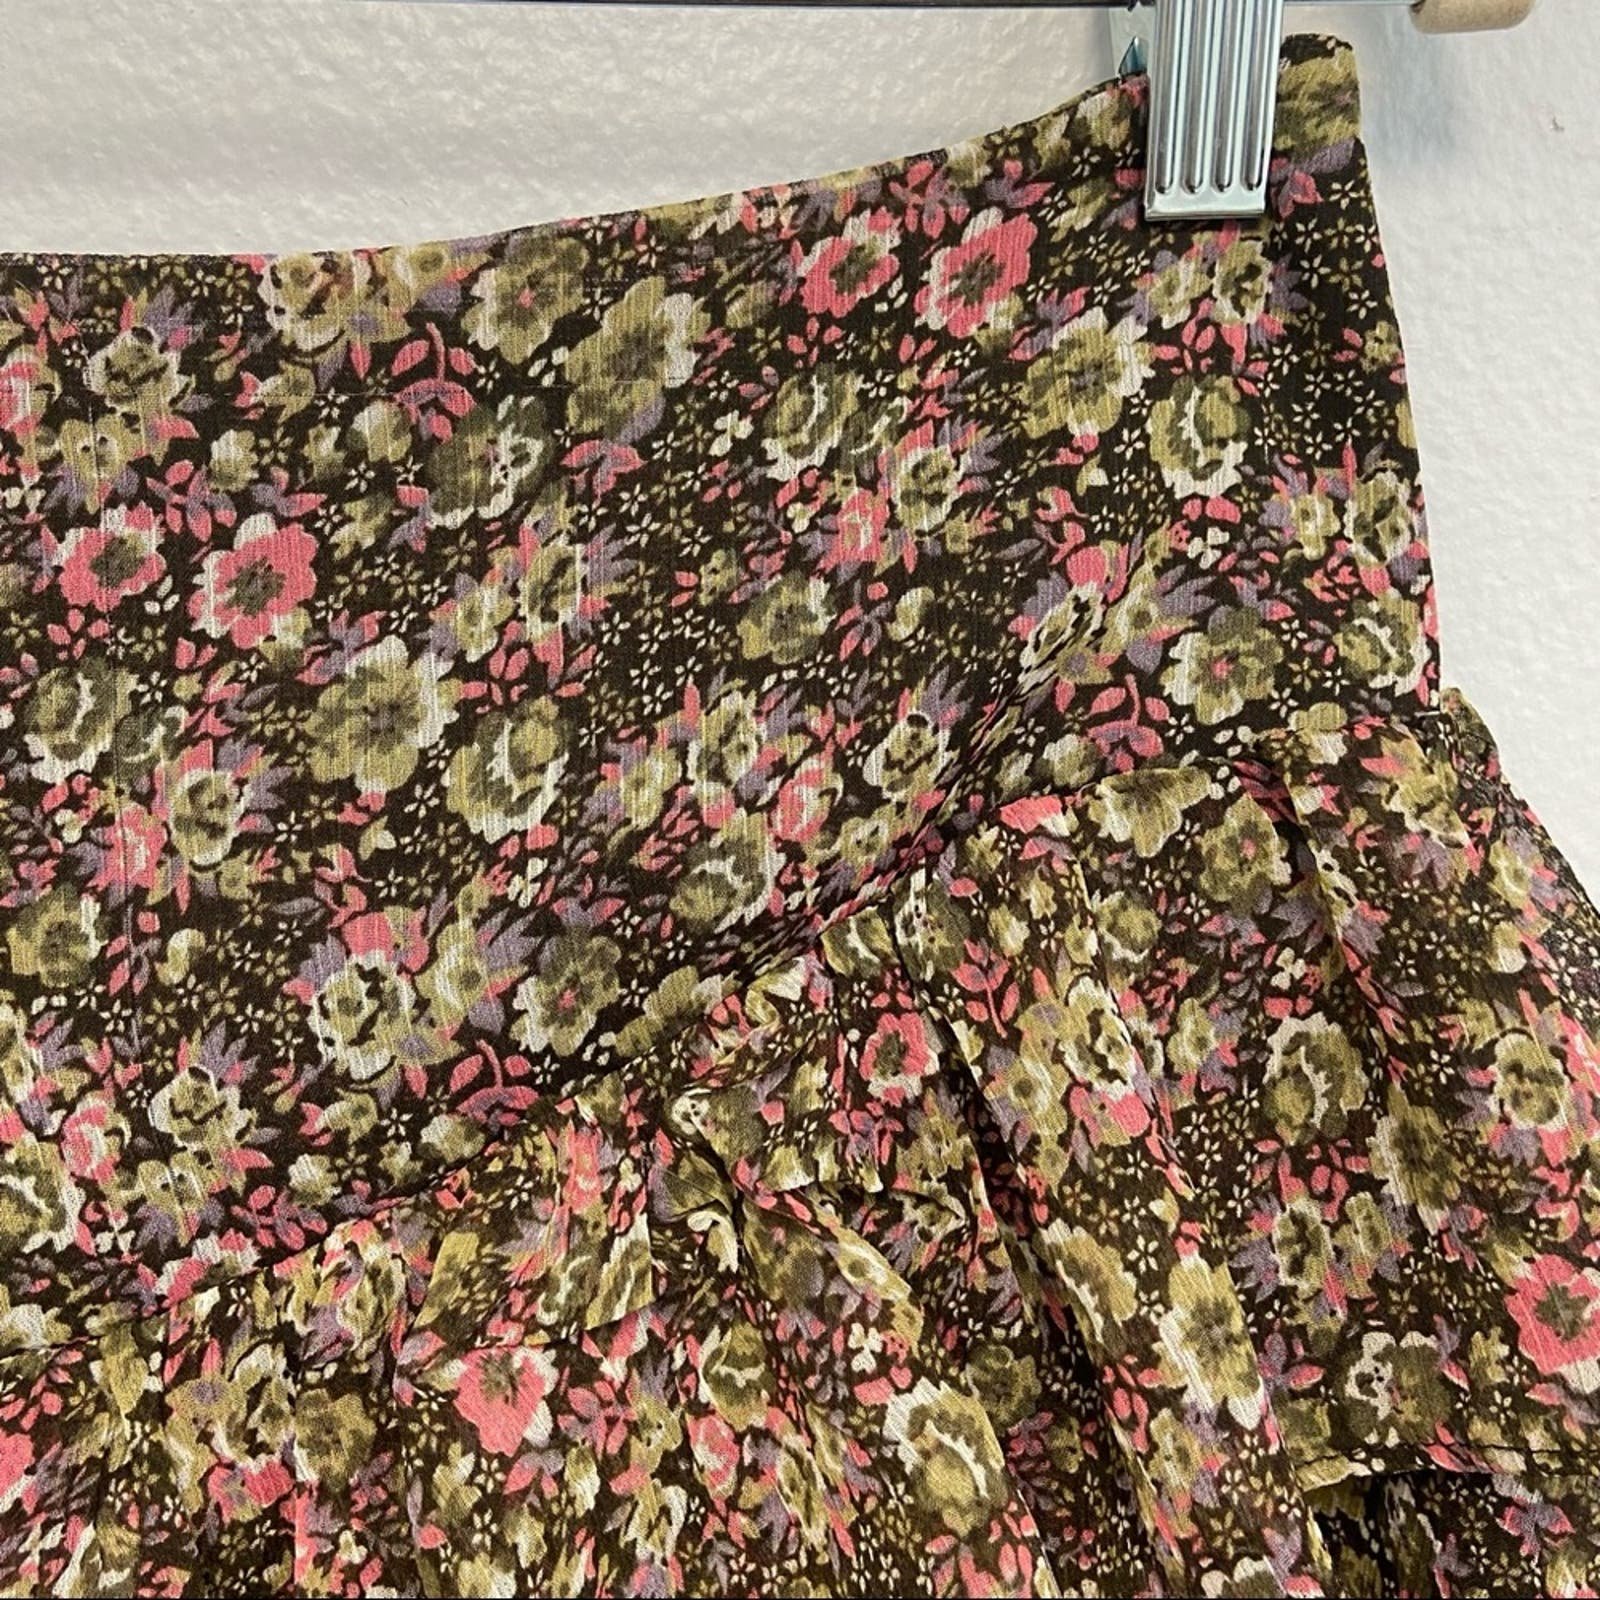 High quality New Walter Baker Becca Ruffled Floral Print Mini Skirt in Tawny Forest Size 8 lrVFBhzo4 best sale